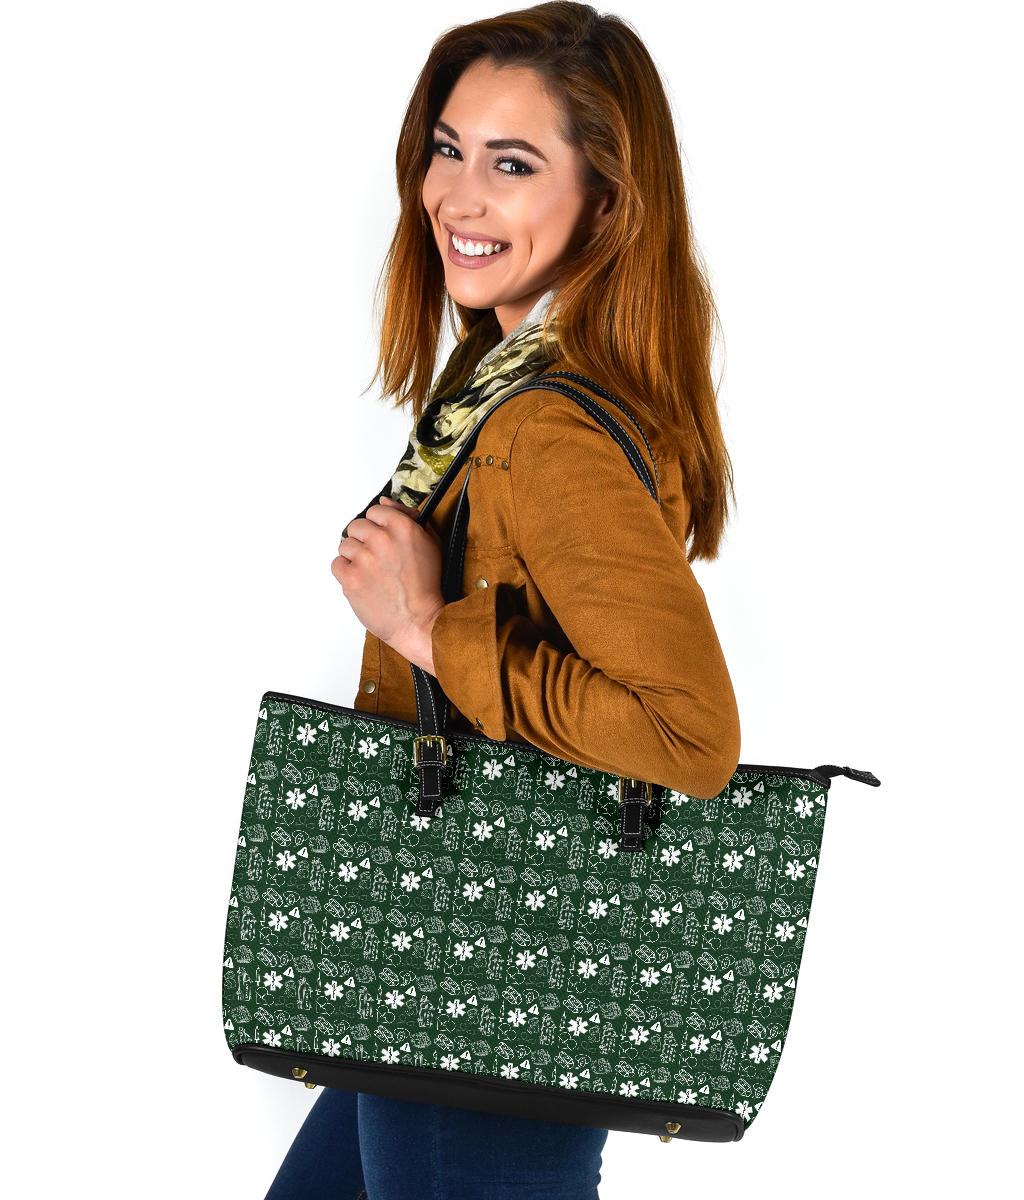 EMS/EMT/Paramedic Women's Green Large PU Faux Leather Tote Bag